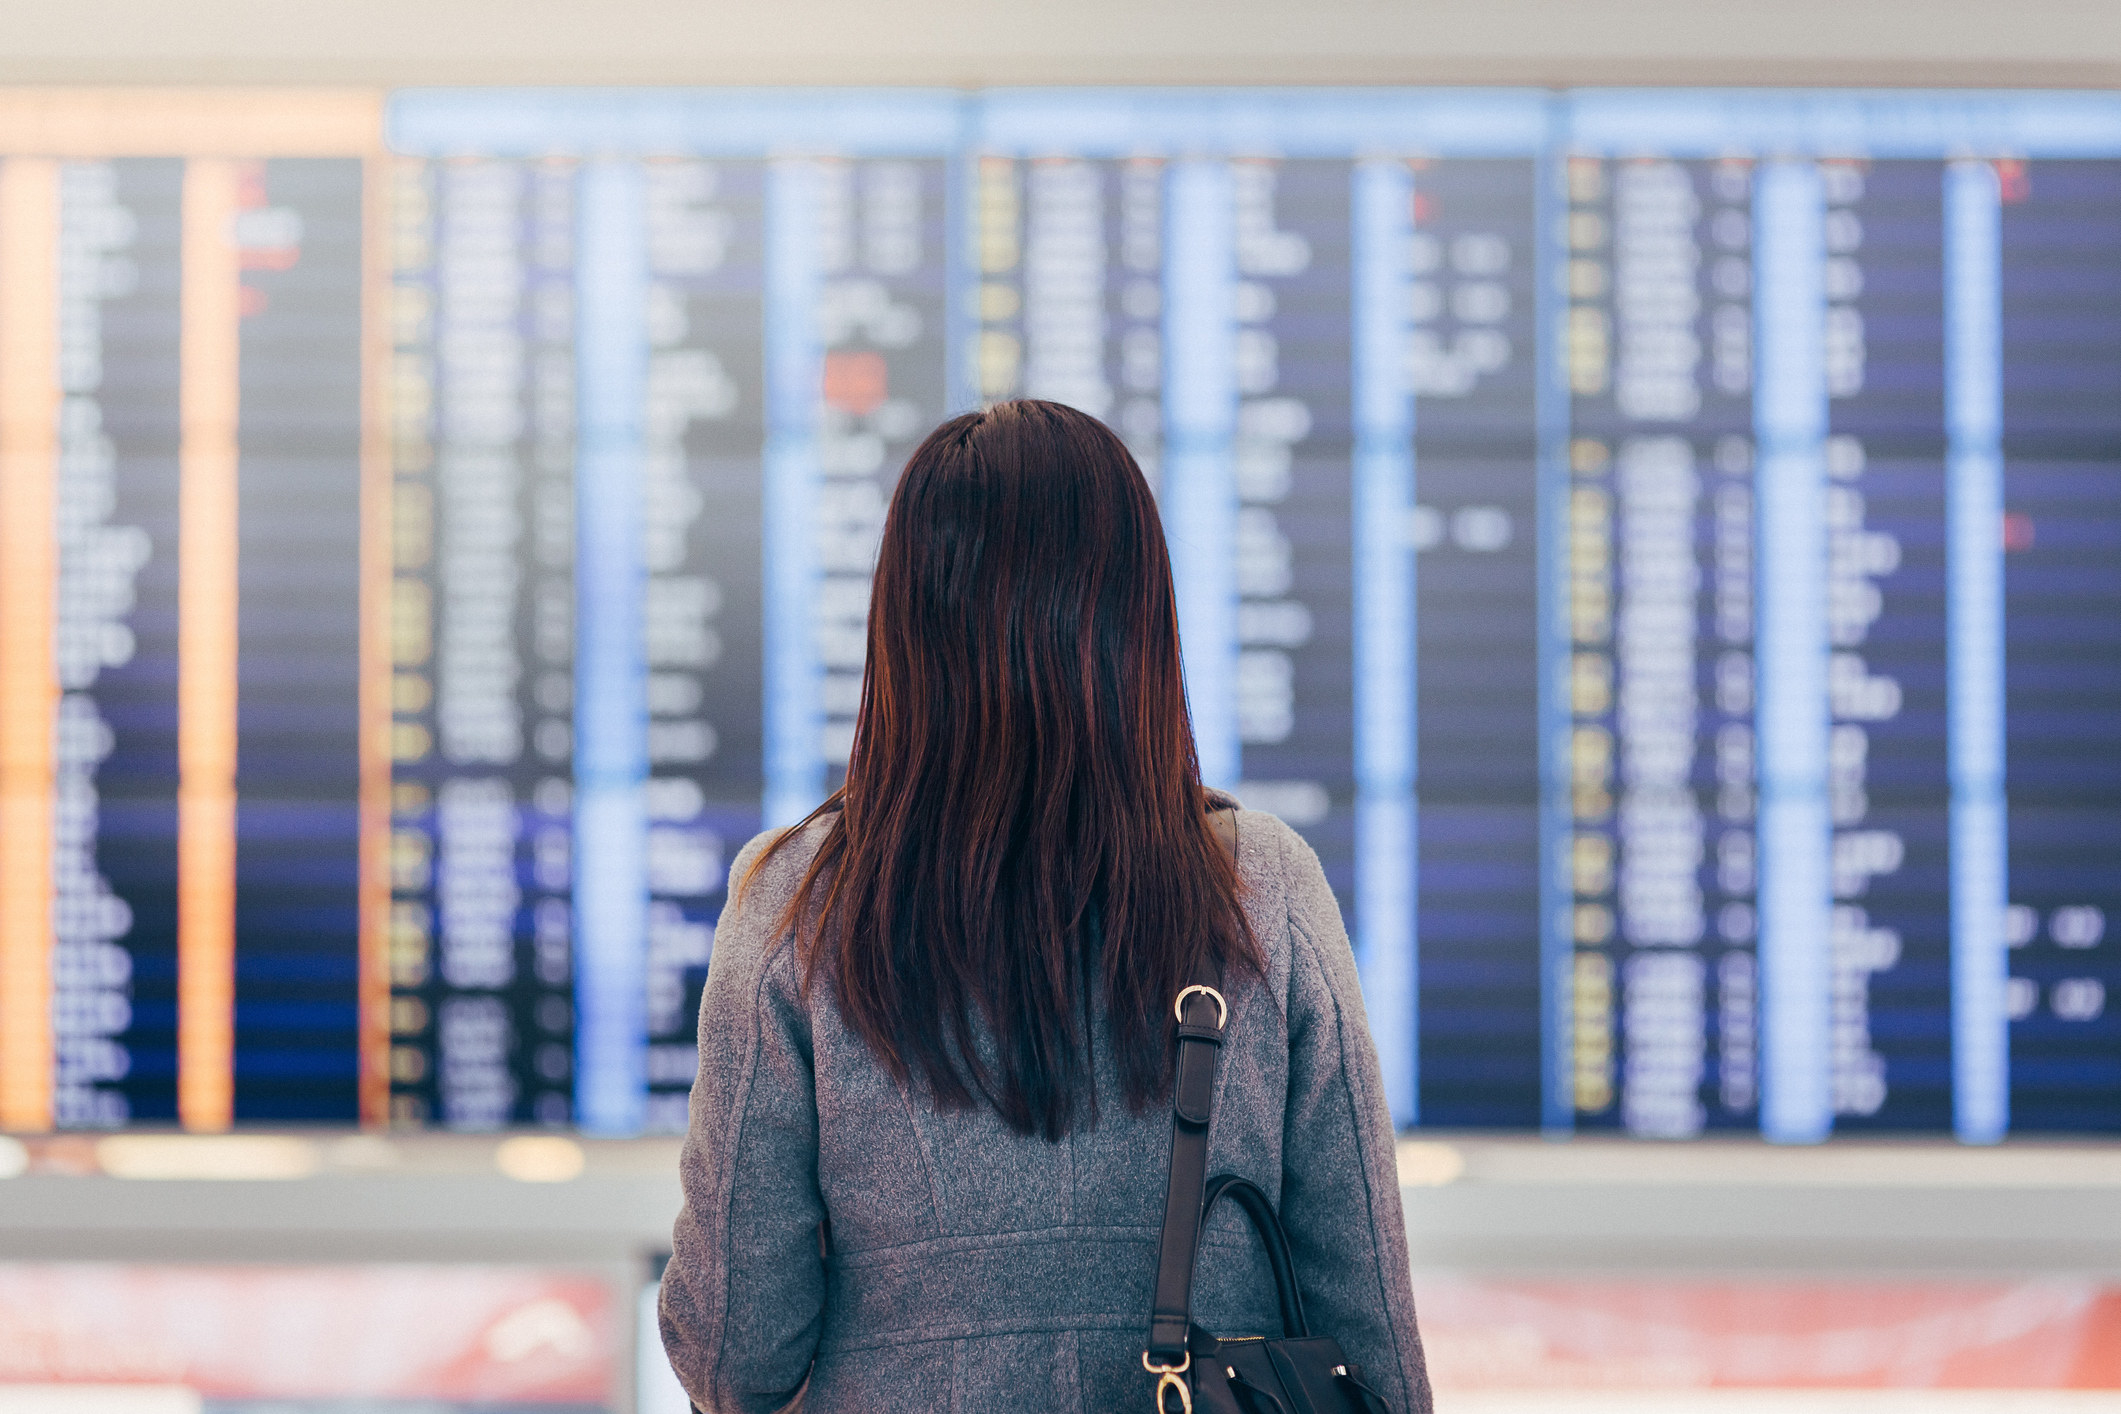 person looking at a flight schedule